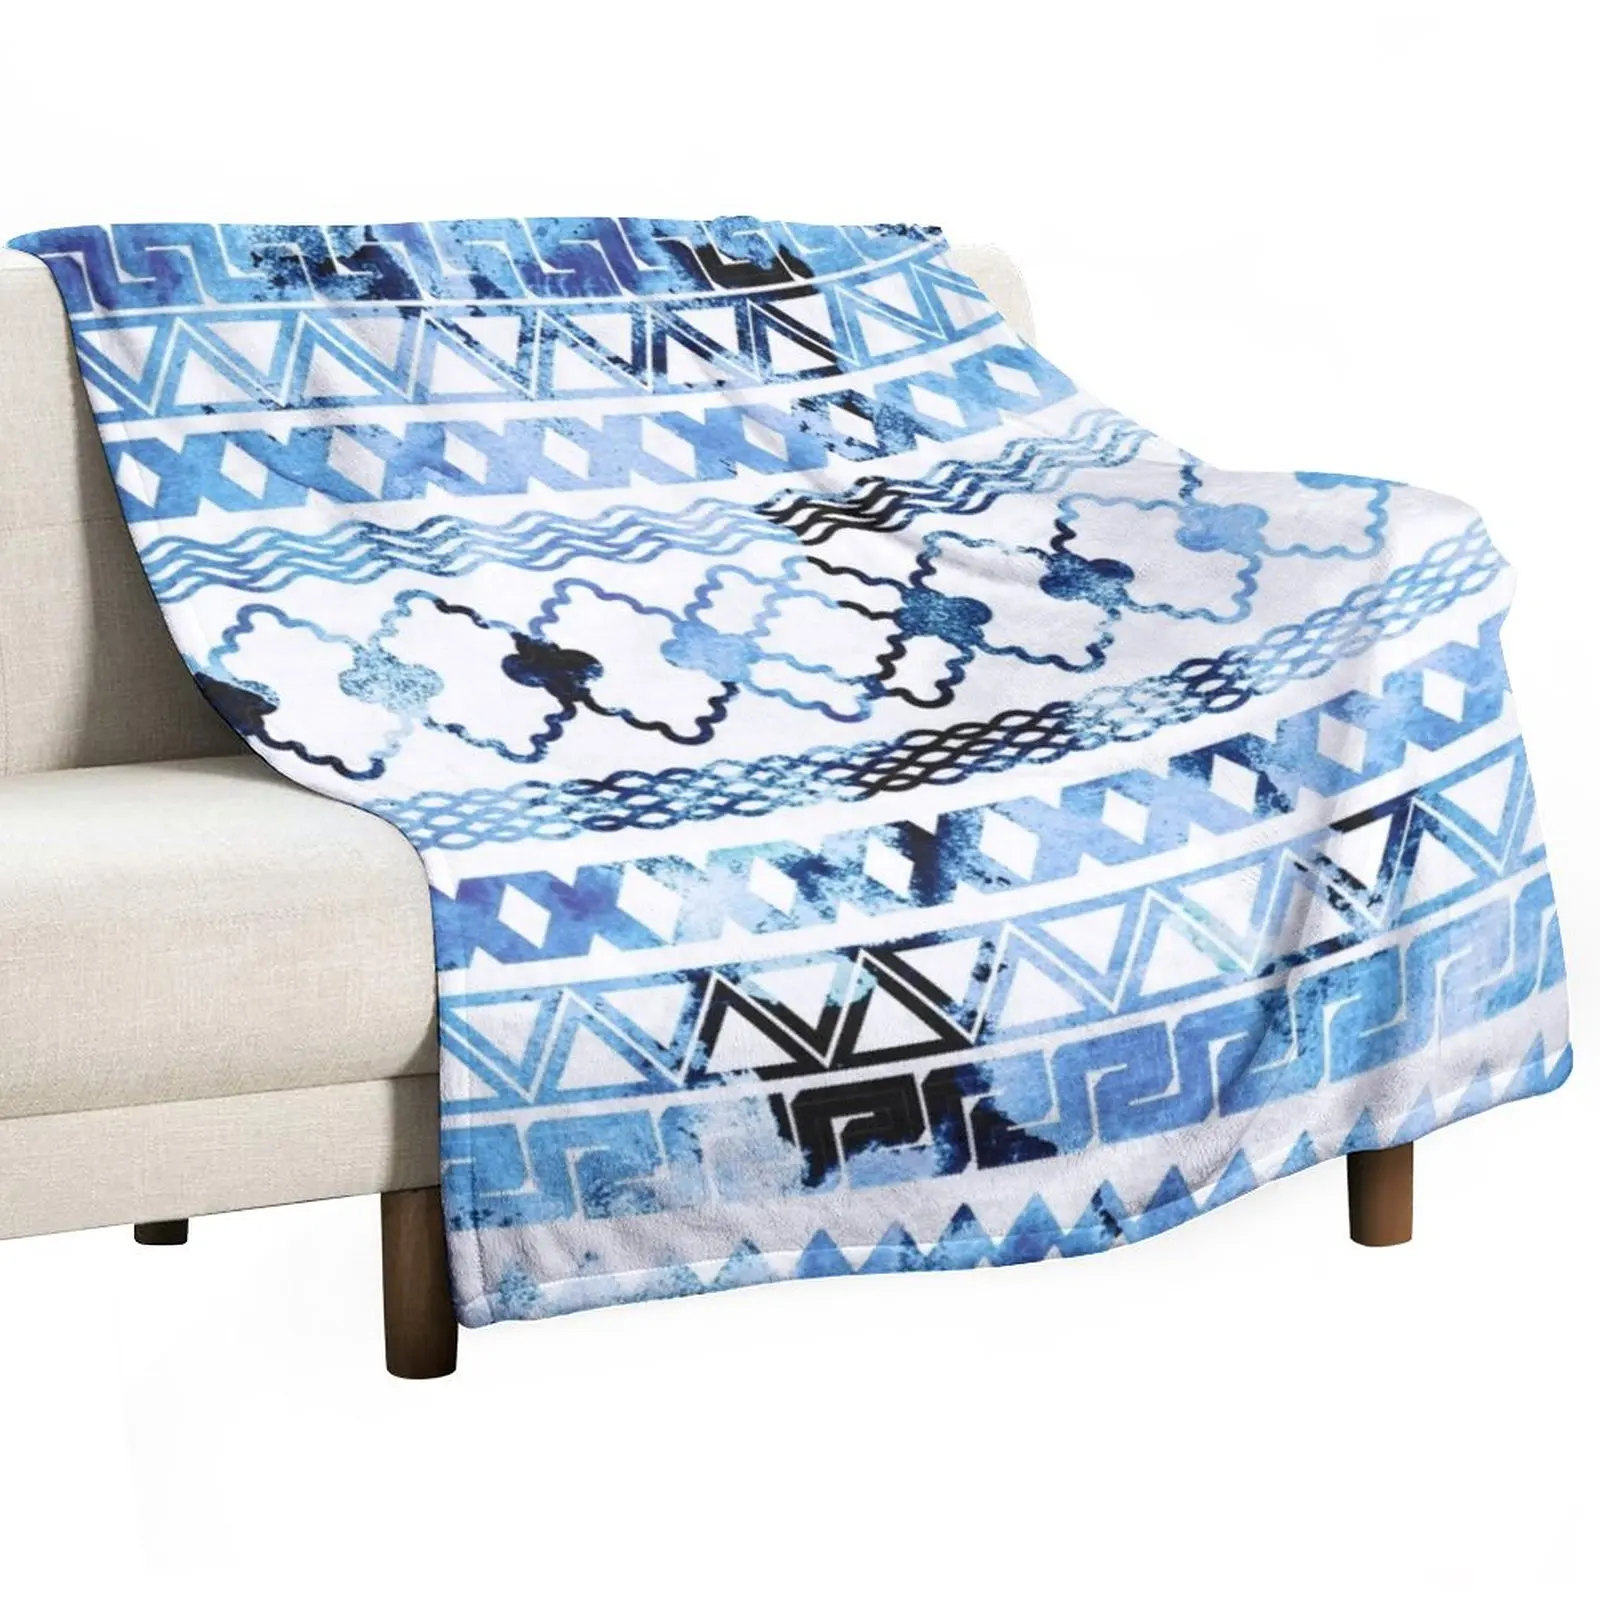 

New Watercolor creative black blush blue geometrical aztec Throw Blanket Flannel Fabric Fluffy Blankets Large